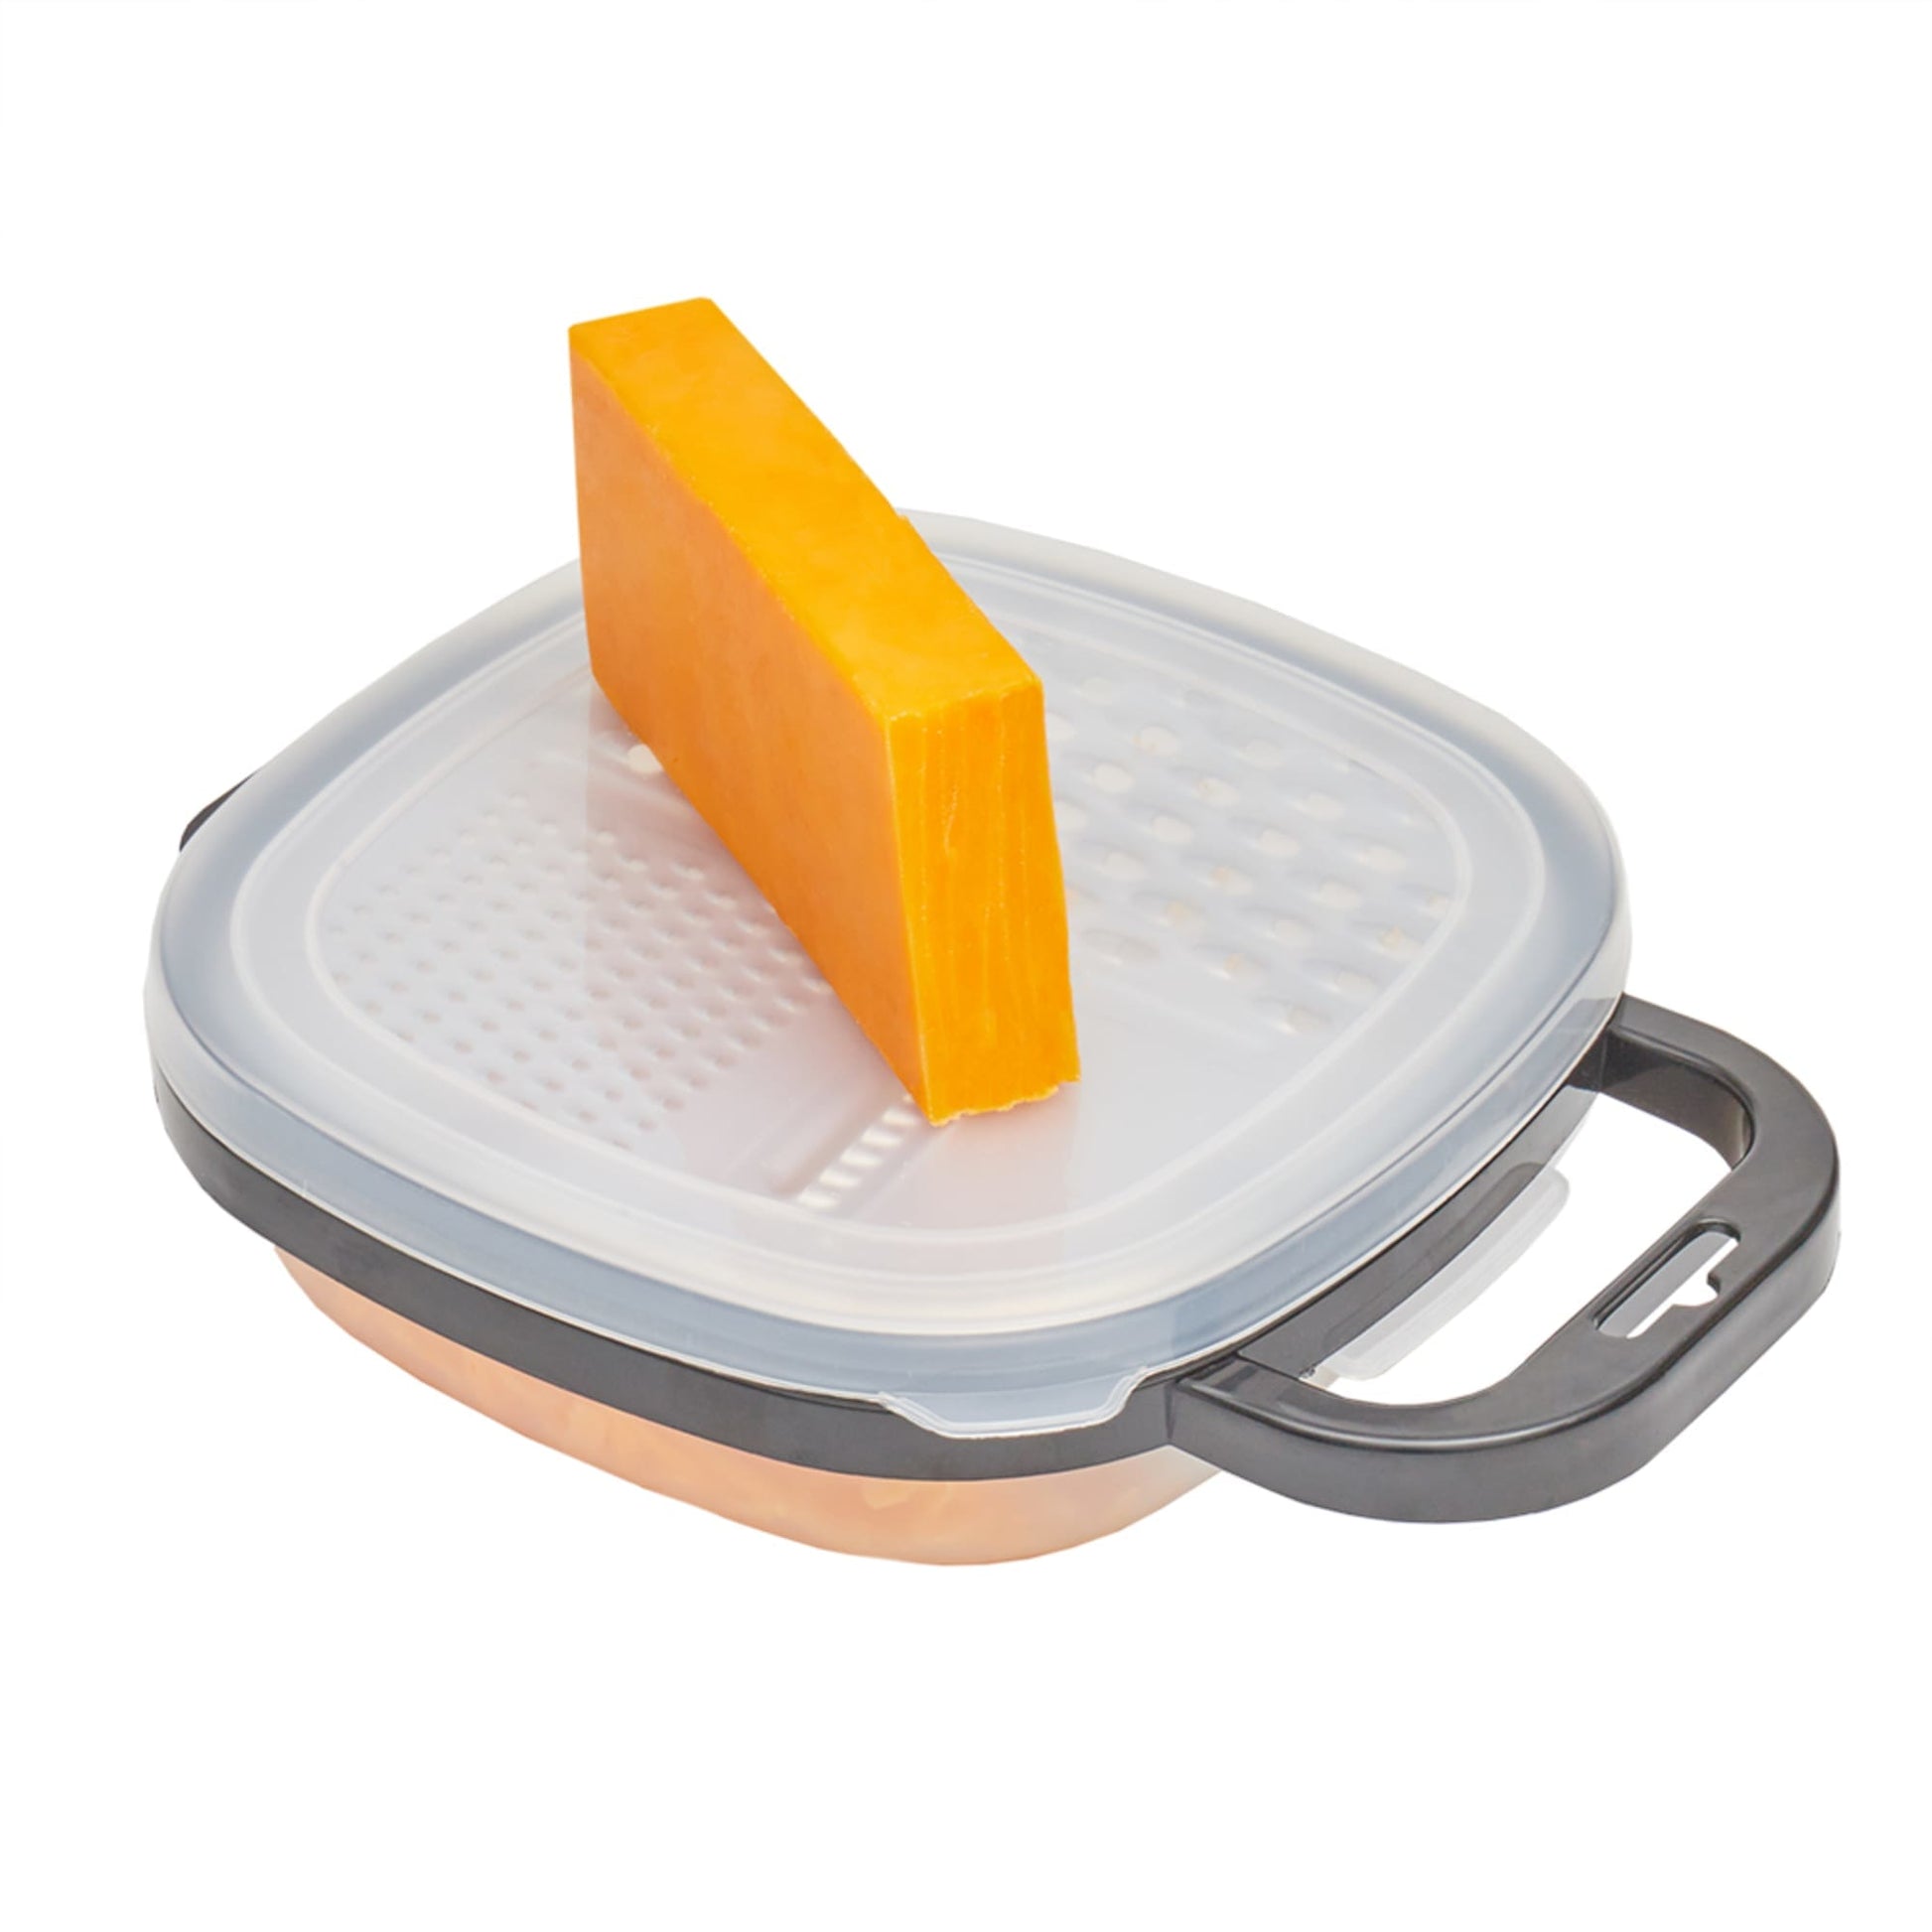 Pot with Strainer Insert Grater Home Rotating Cheese Grater 3 To 1 Multi